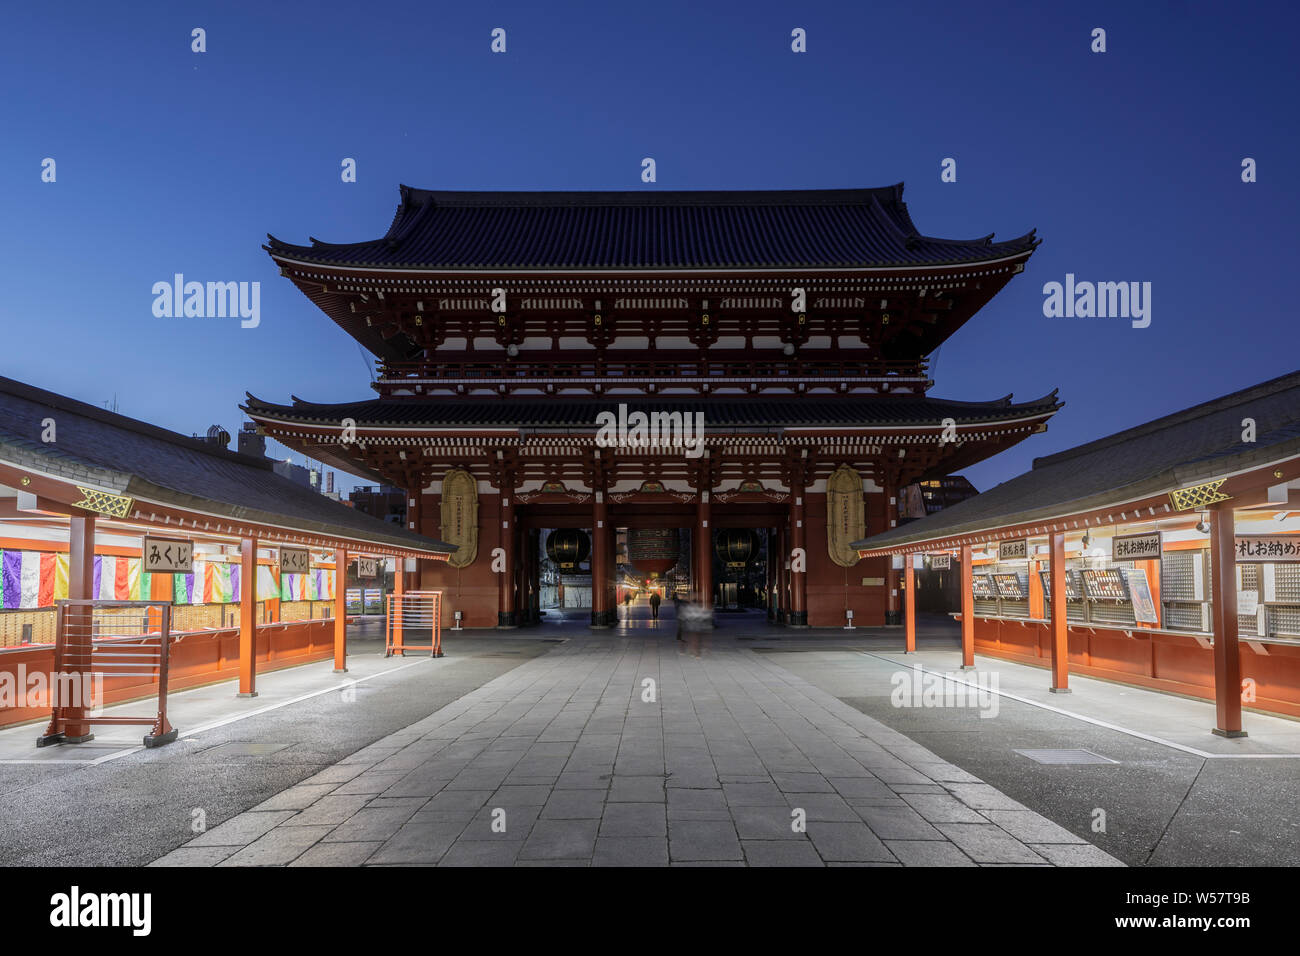 Senso-ji temple in the city of Tokyo, Japan. An ancient Buddhist temple in the Asakusa district, Senso-ji is the most widely visited spiritual place. Stock Photo